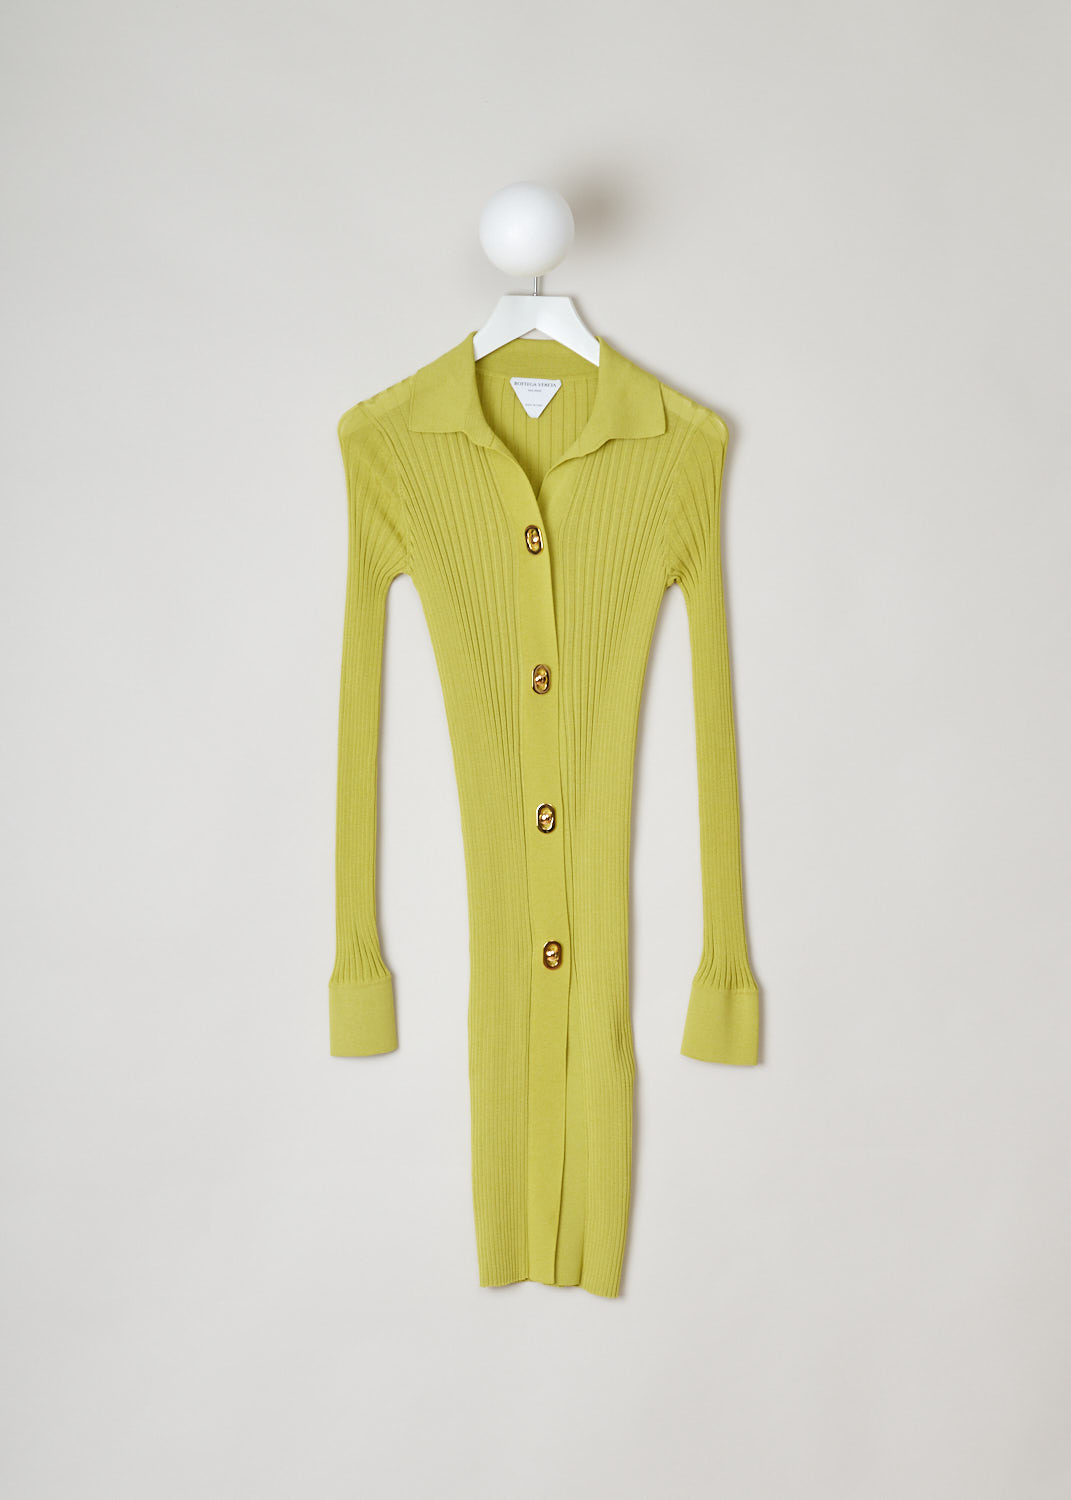 Bottega Veneta, Yellow ribbed blouse dress, 637824_V06P0_7275, yellow, front, Skin tight blouse dress featuring a ribbed weaving pattern, pointed collar and long cuffed sleeves supporting a single button. The fastening option on this model are the decorative press buttons on the front. 